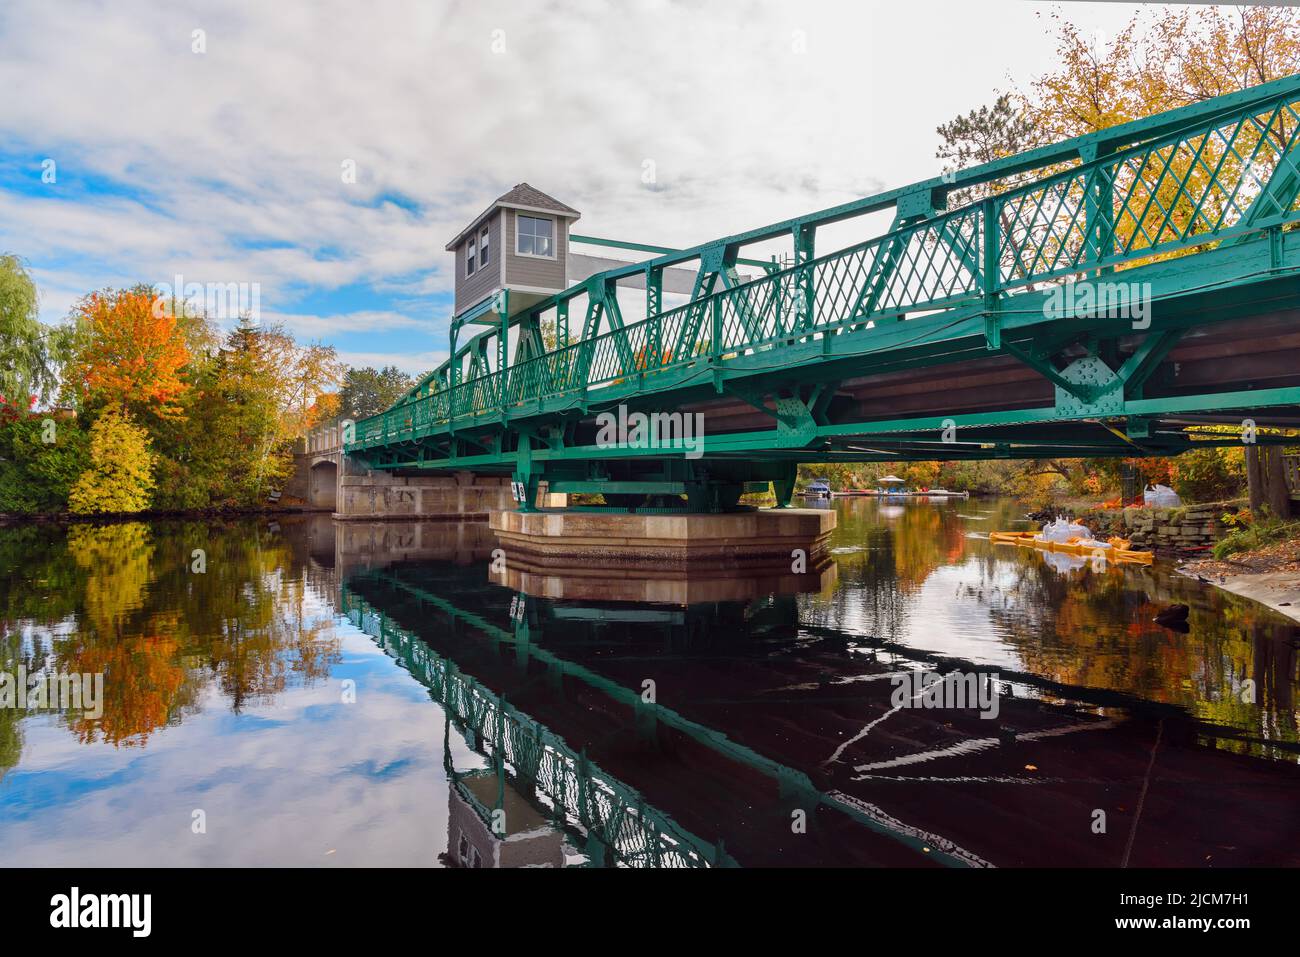 Swing bridge across a river on a partly cloudy autumn day. Reflection in water. Stock Photo